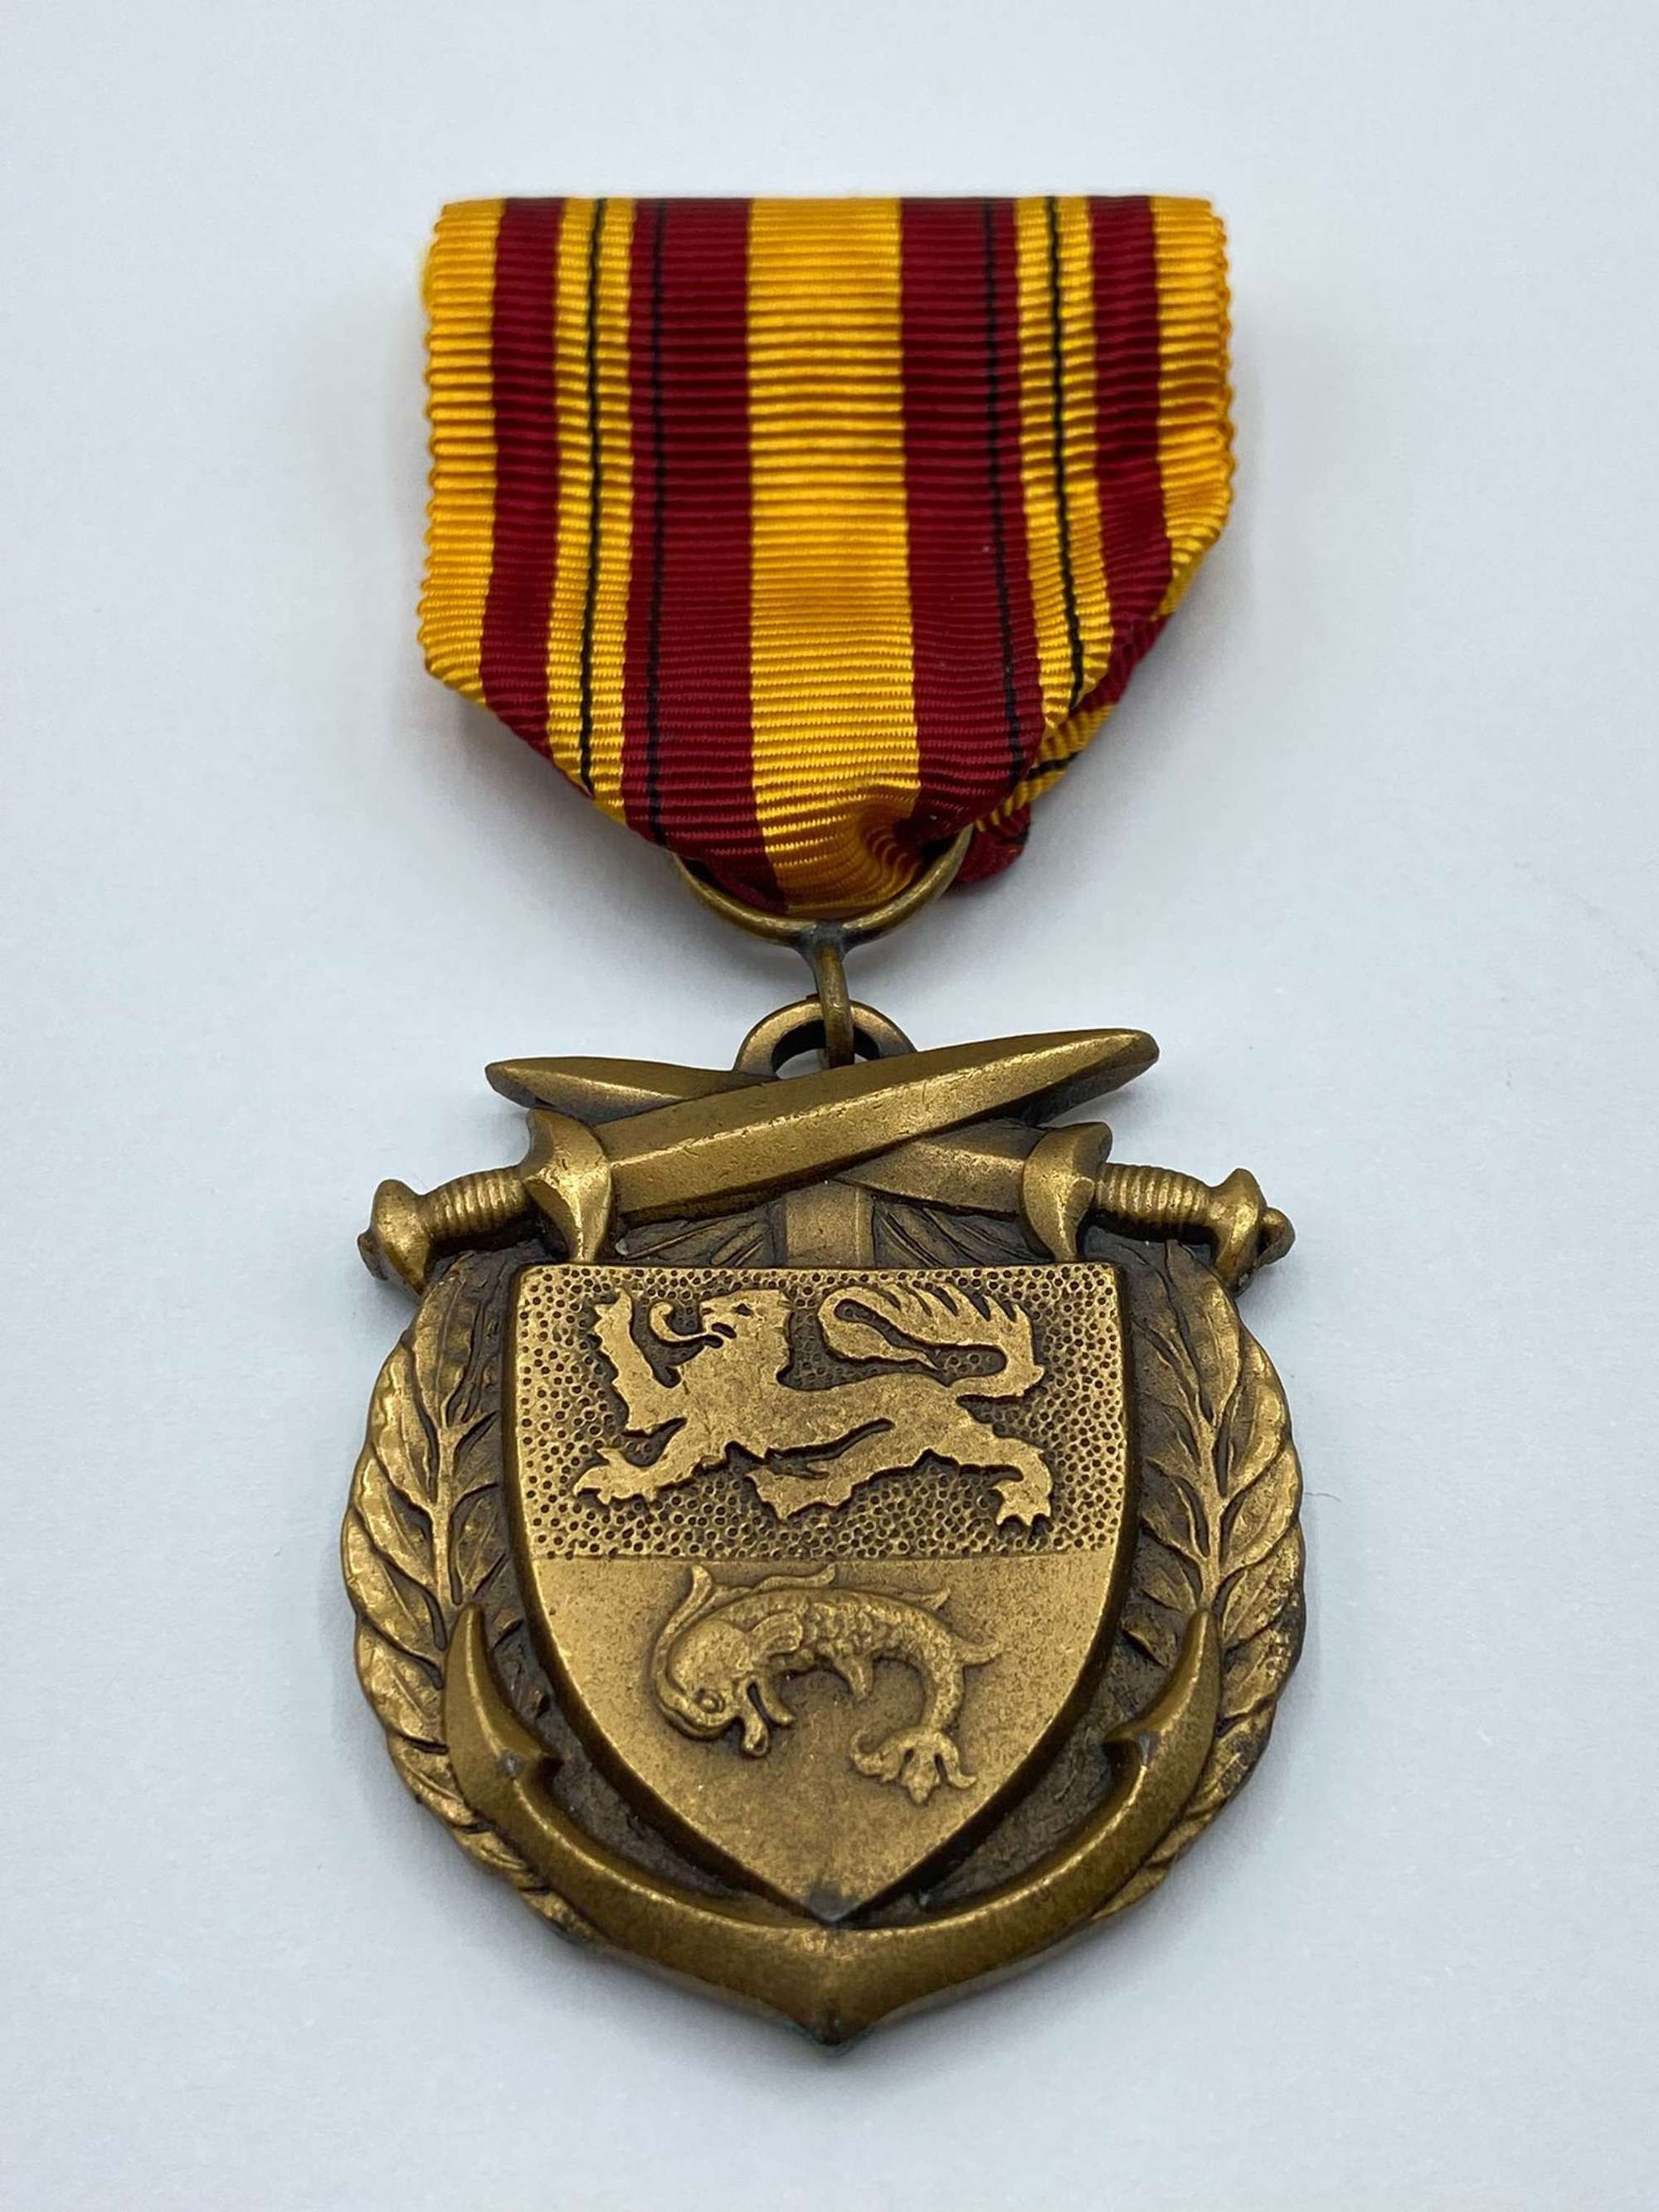 WW2 Dunkirk Commemorative Medal Medaille Dunkerque 1940